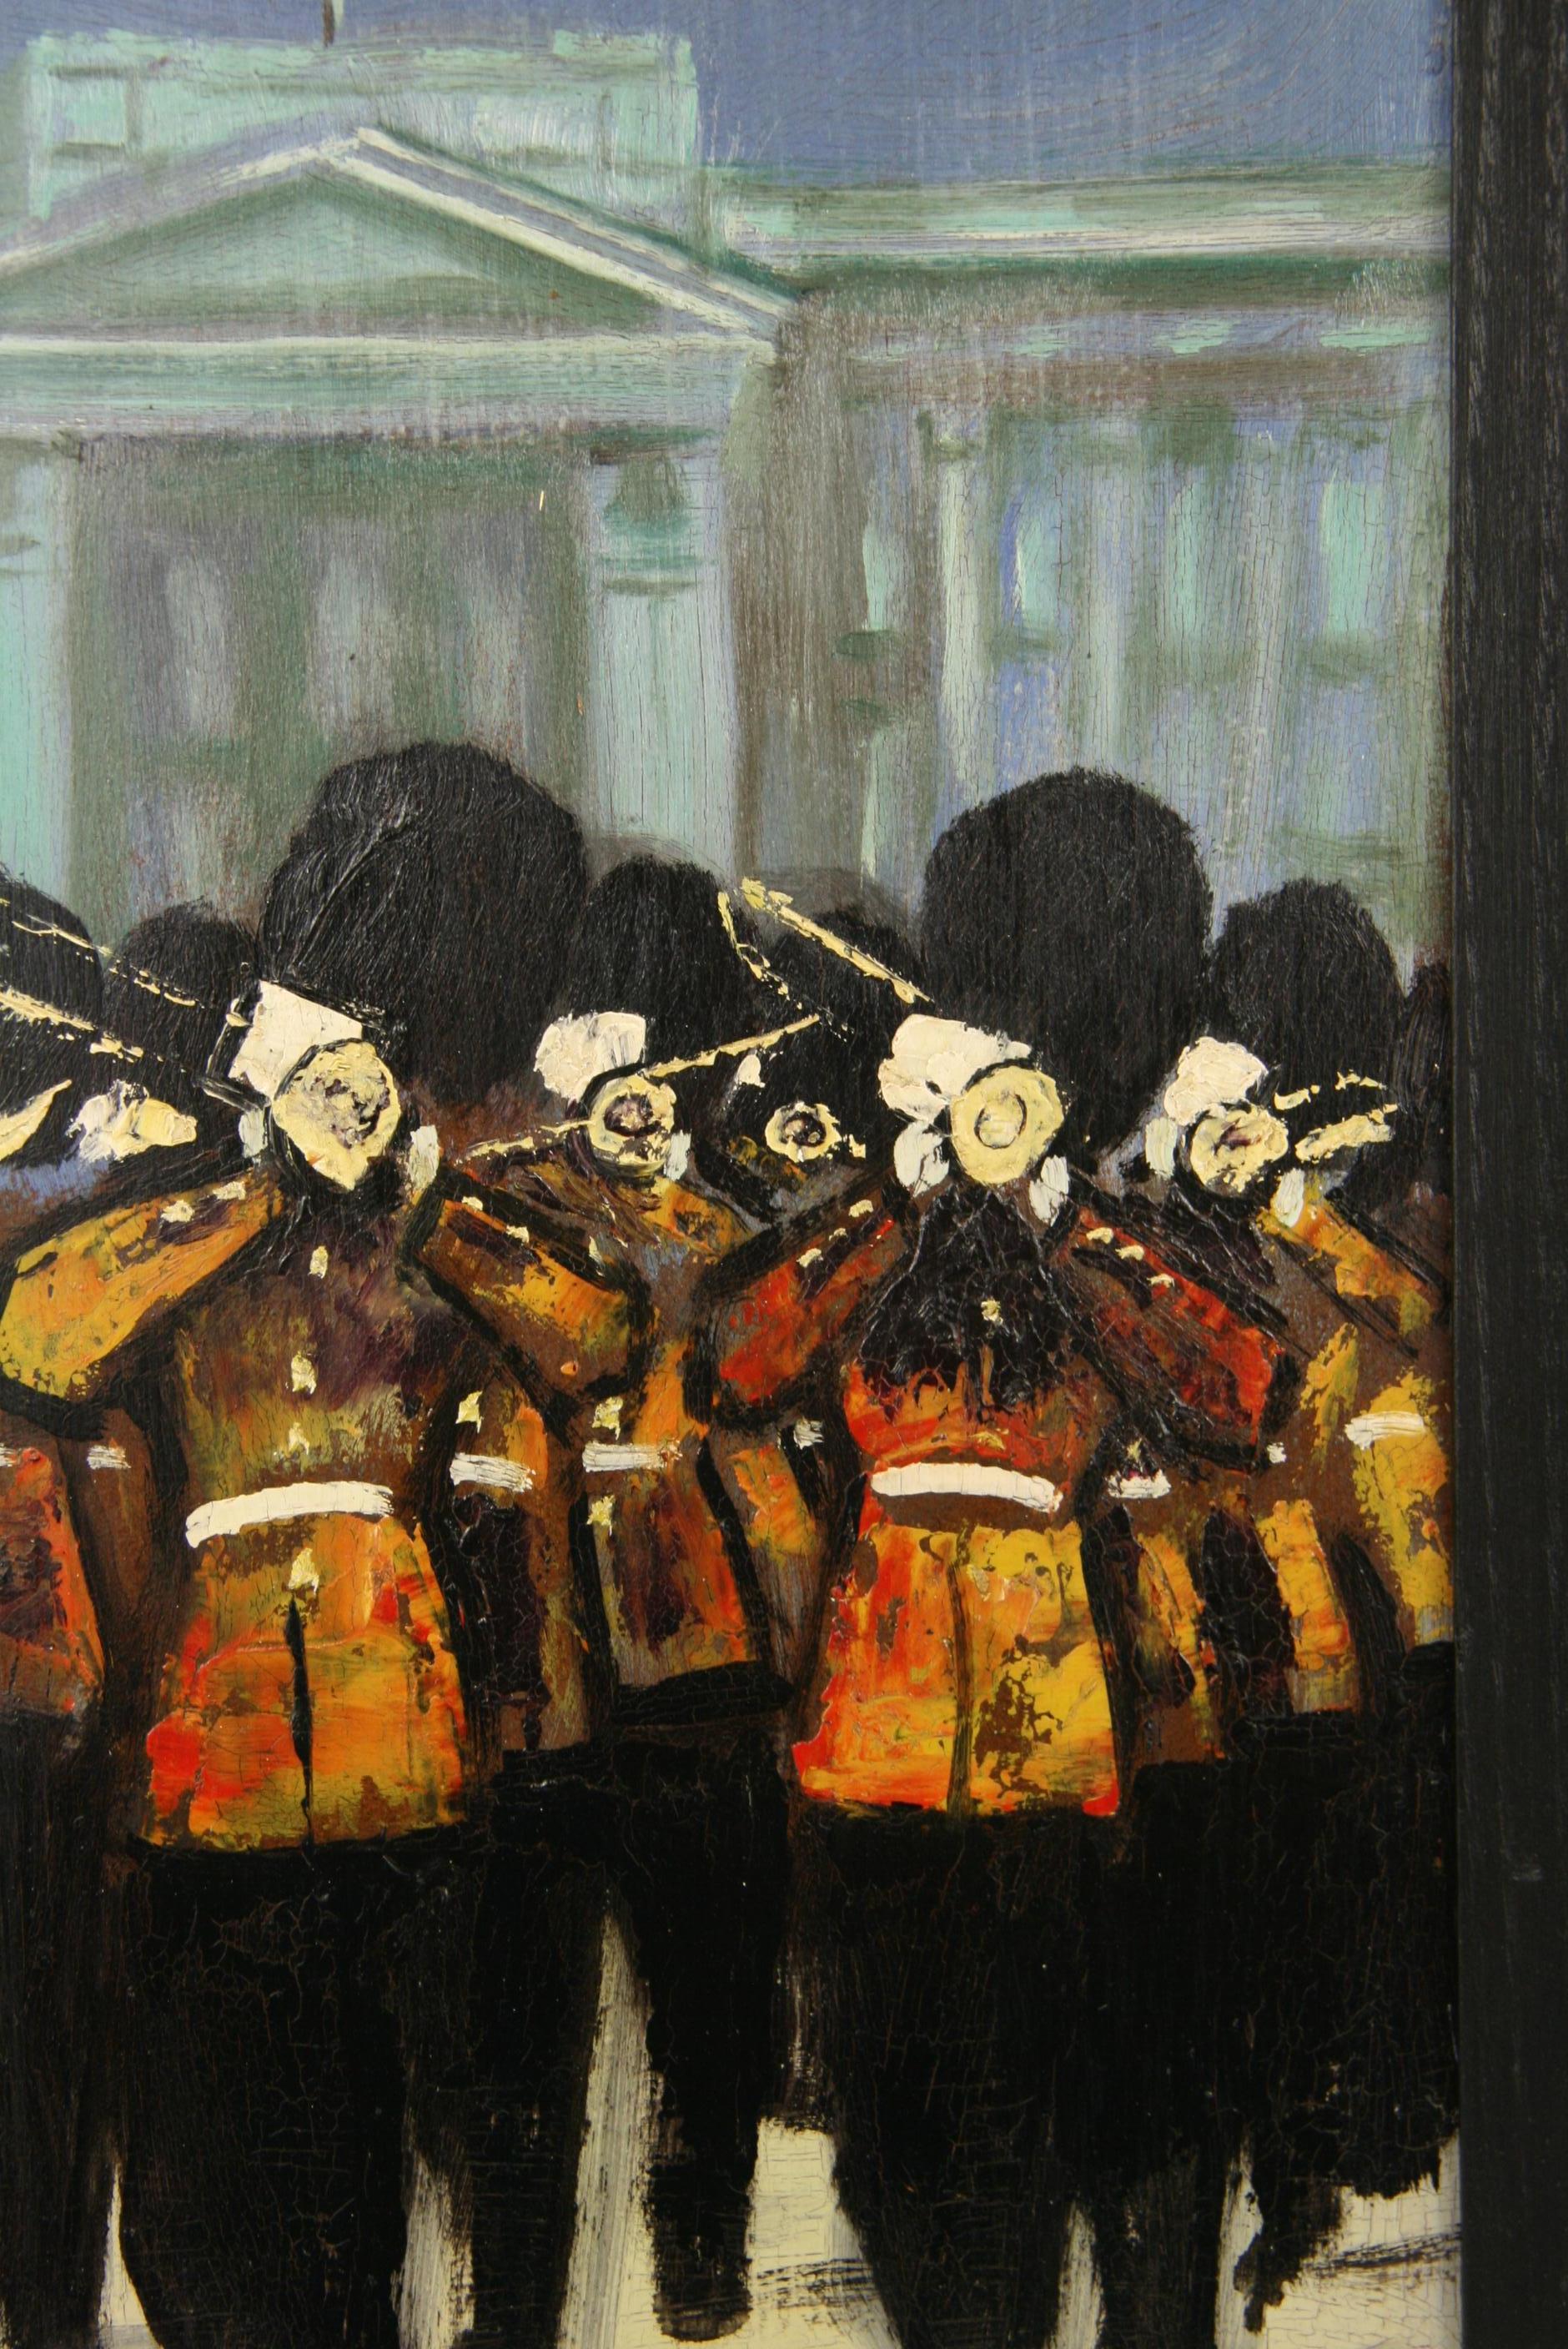 1-4031 Buckingham Palace Band, acrylic on masonite, displayed in a black wood frame, signed lower left by W.Bird 
Image size 17 H x 7.5 W